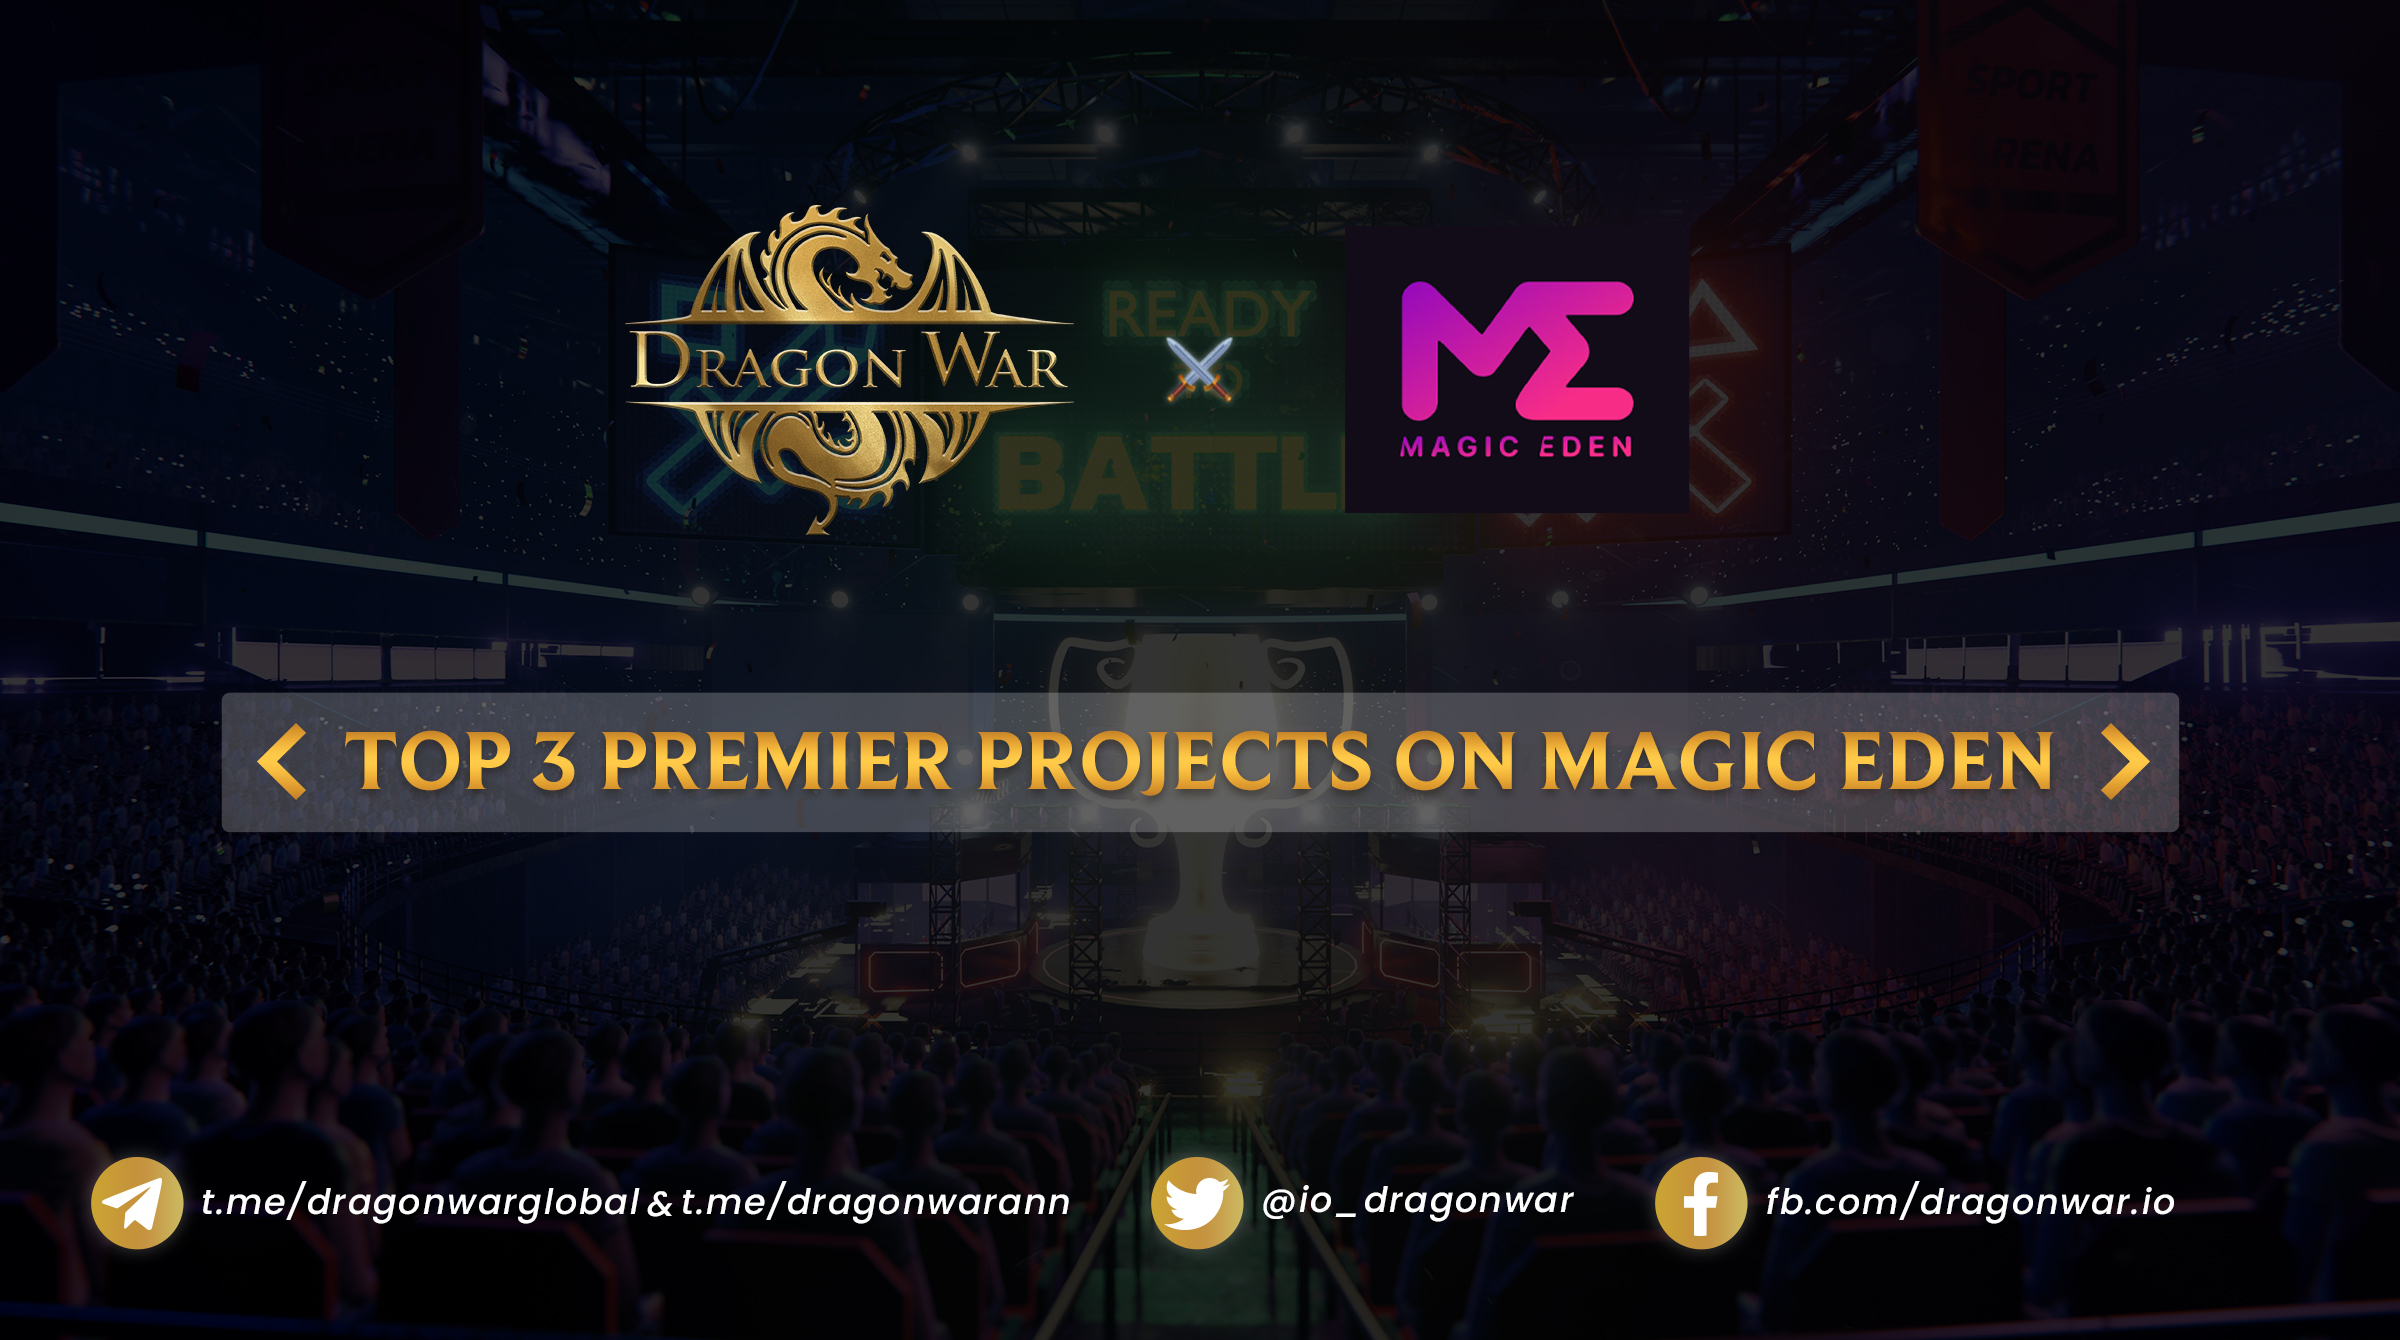 Magic Eden And Dragon War Have Confirmed Their Partnership 1